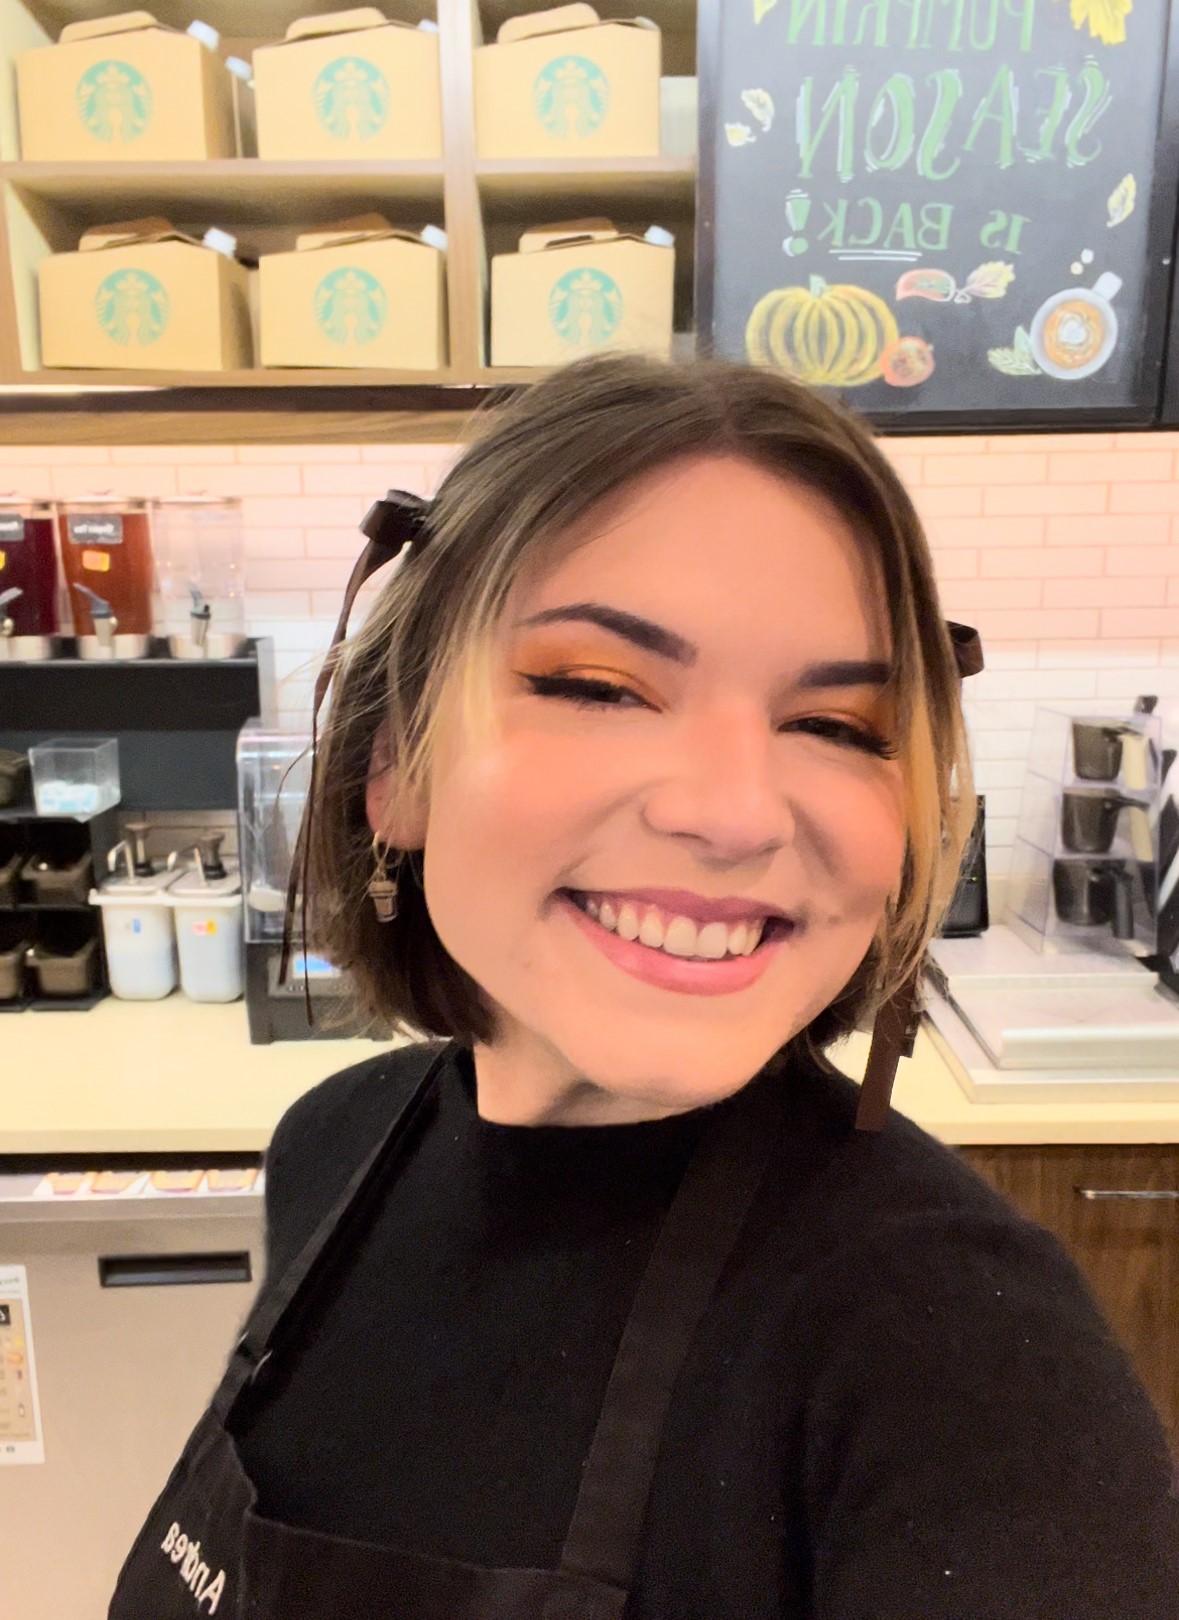 A person poses with a smile while wearing a headset at a Starbucks store.